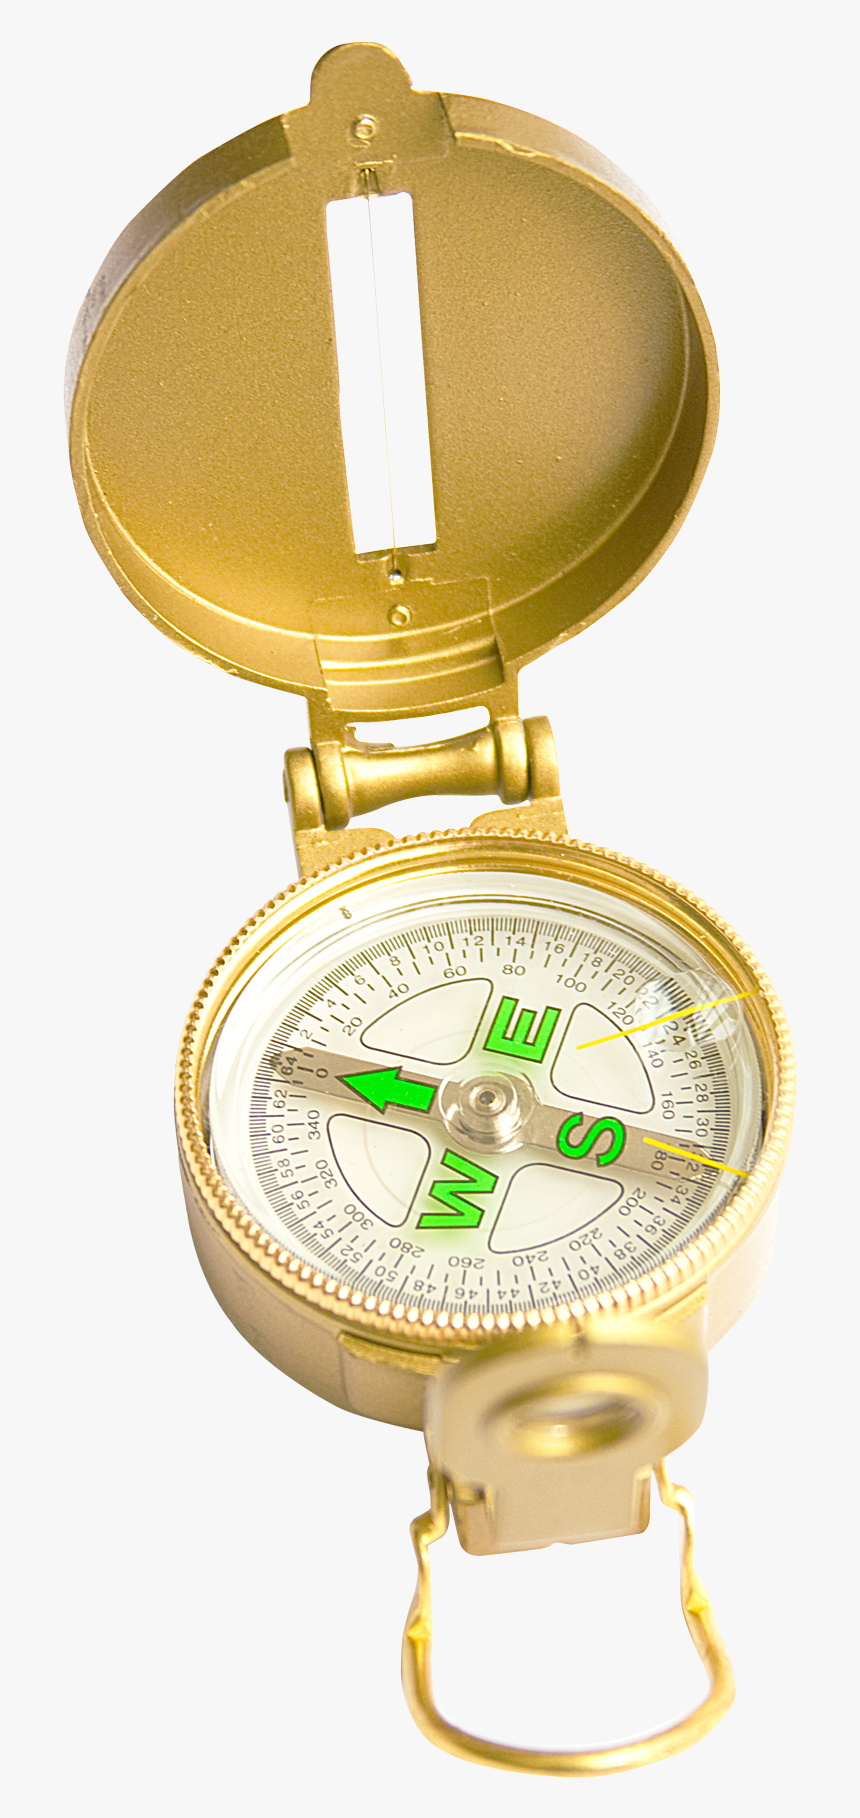 Compass Png Image - Compass, Transparent Png, Free Download